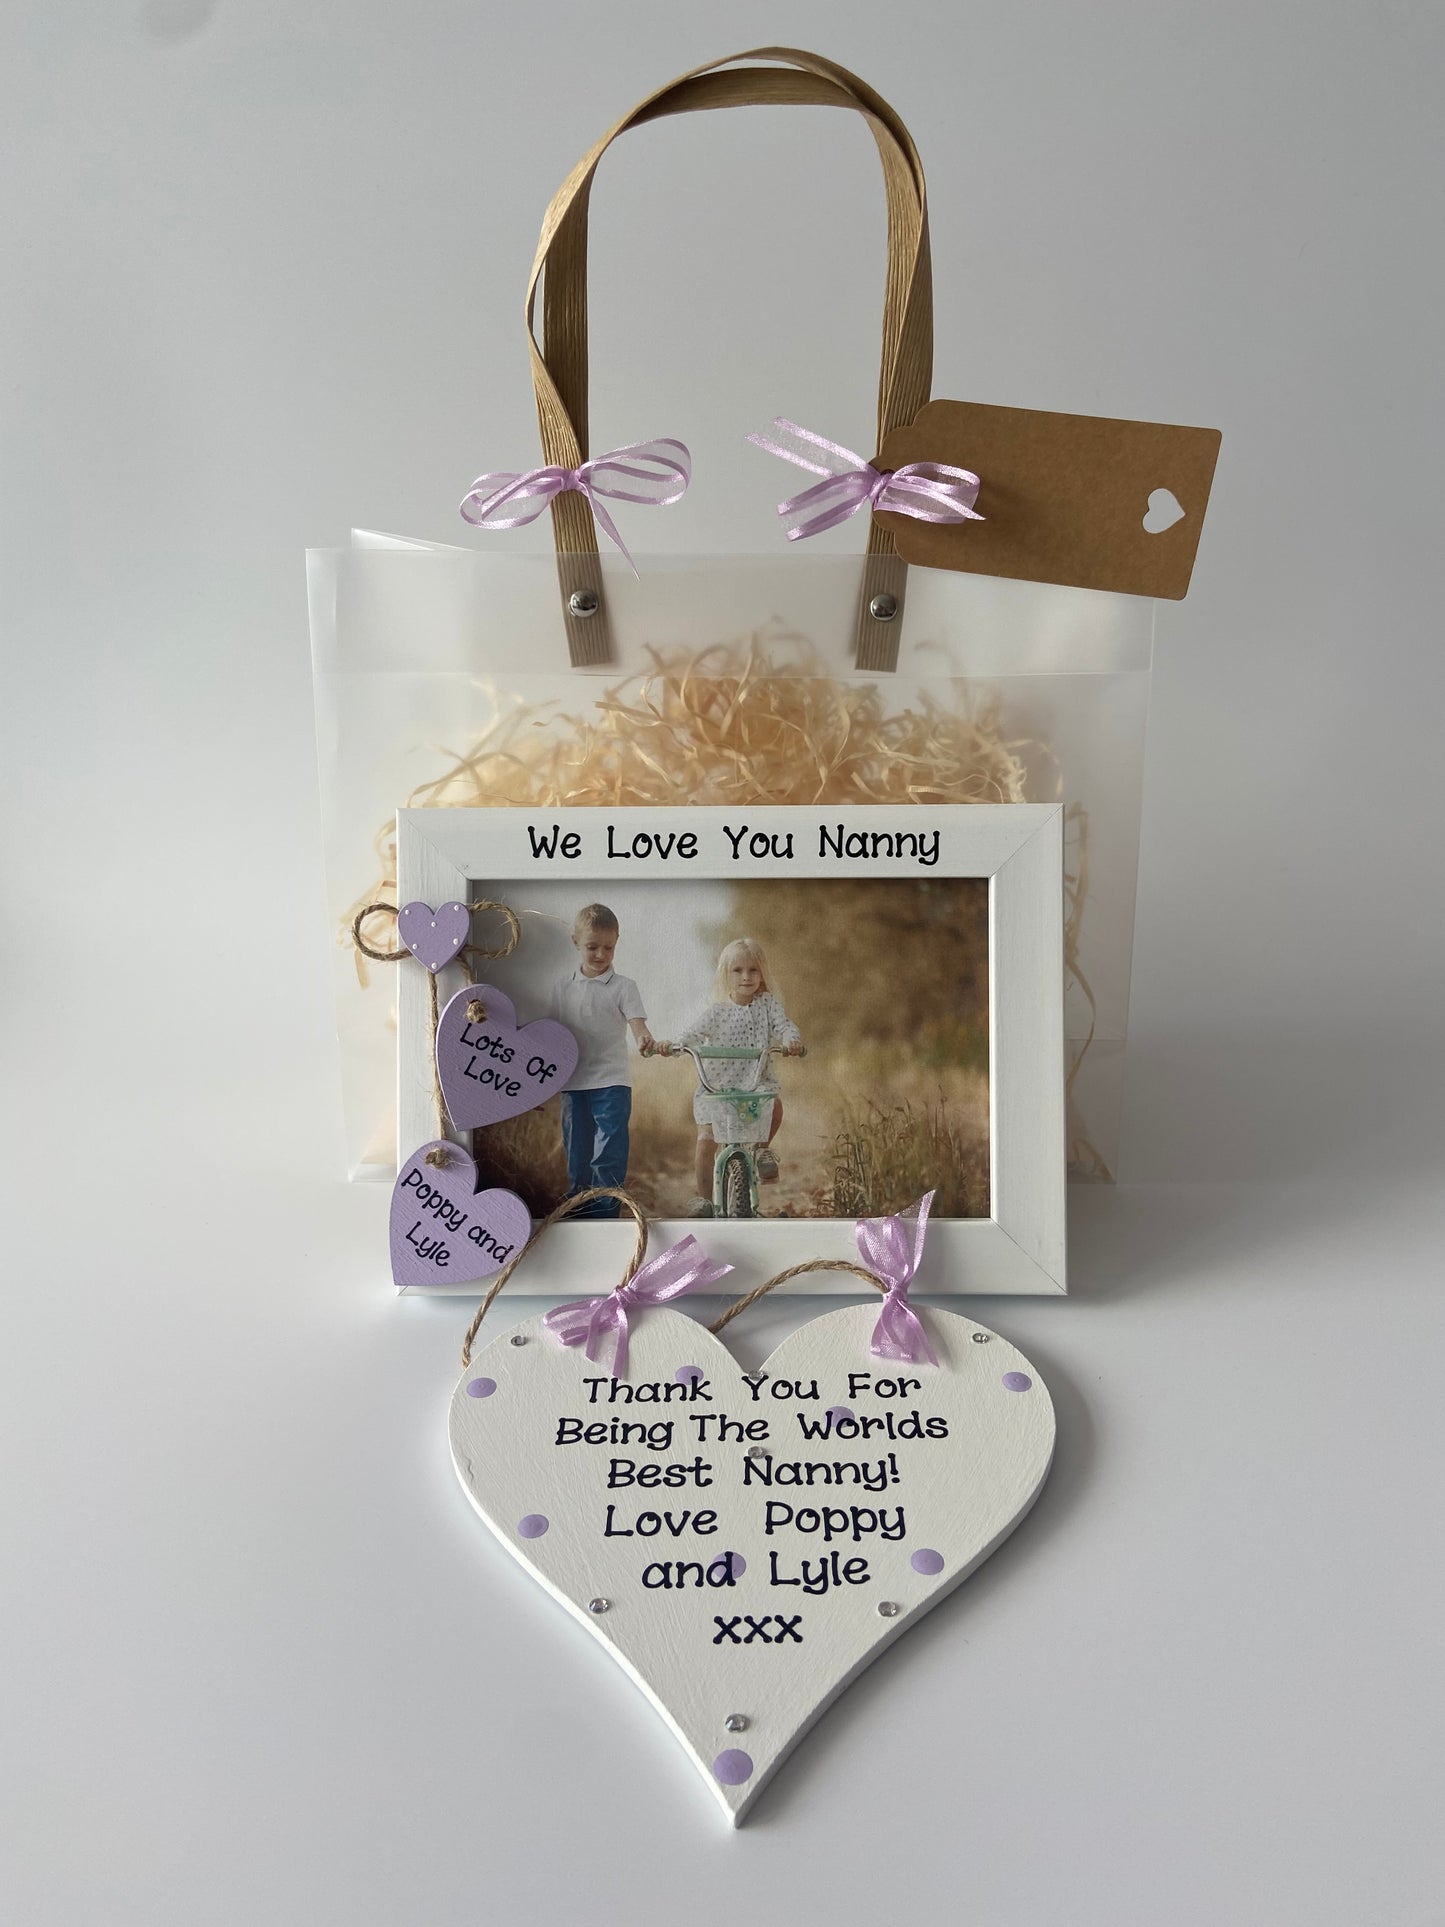 Image shows gift set including frame and plaque for a nanny, plaque decorated with polka dots, gems and ribbon, Frame includes two hearts with text and names of ur choice. Includes ur own photo and gift wrap.